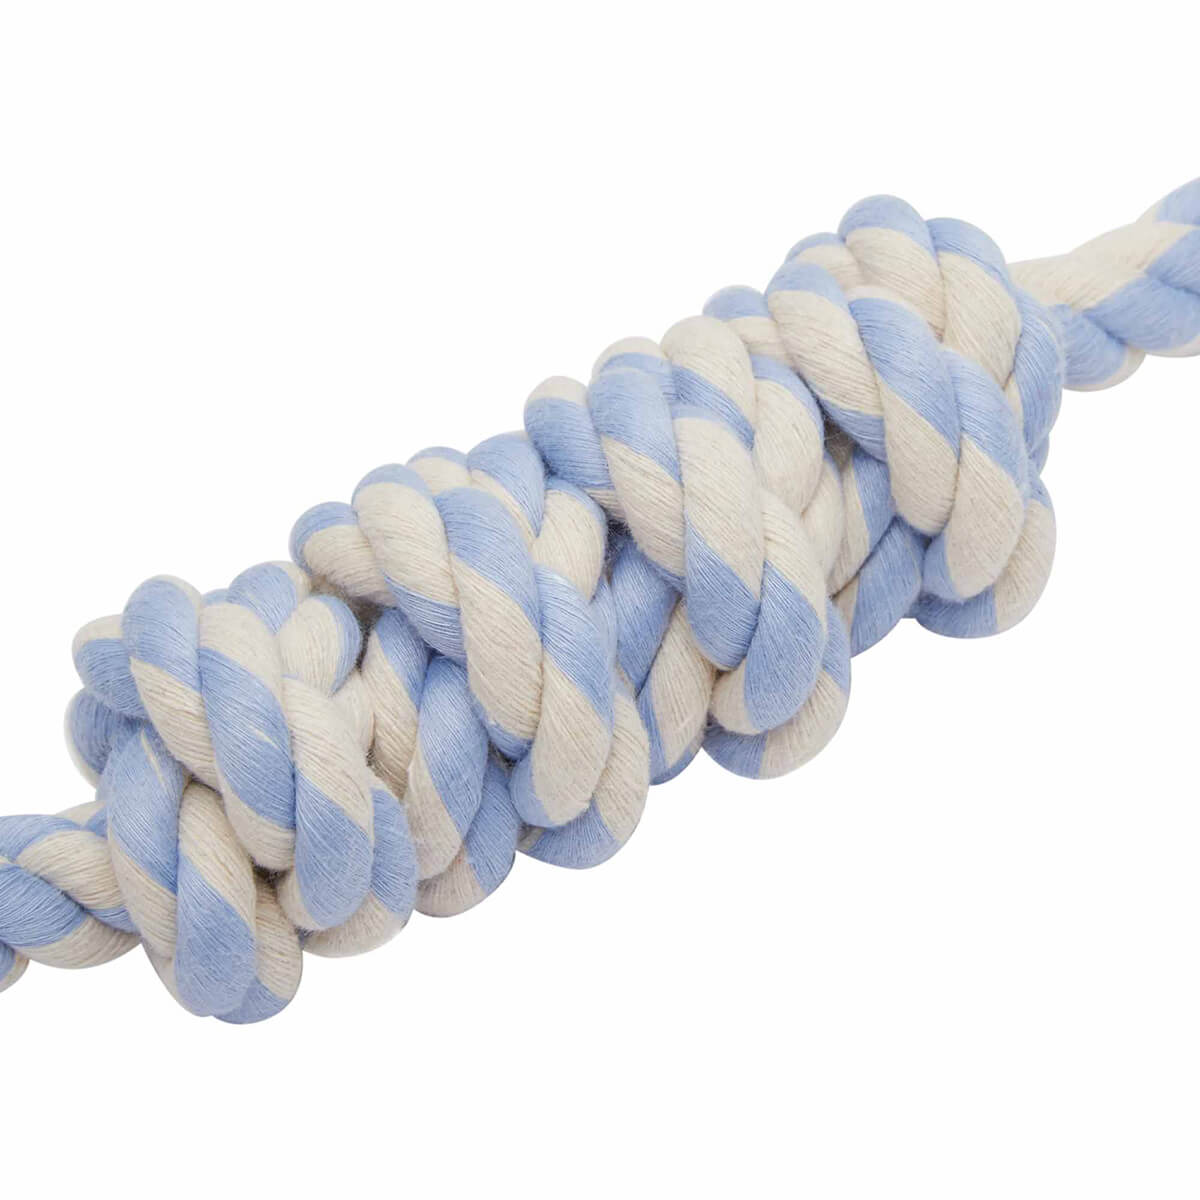 Lexi & Me Rope Toy Bumper